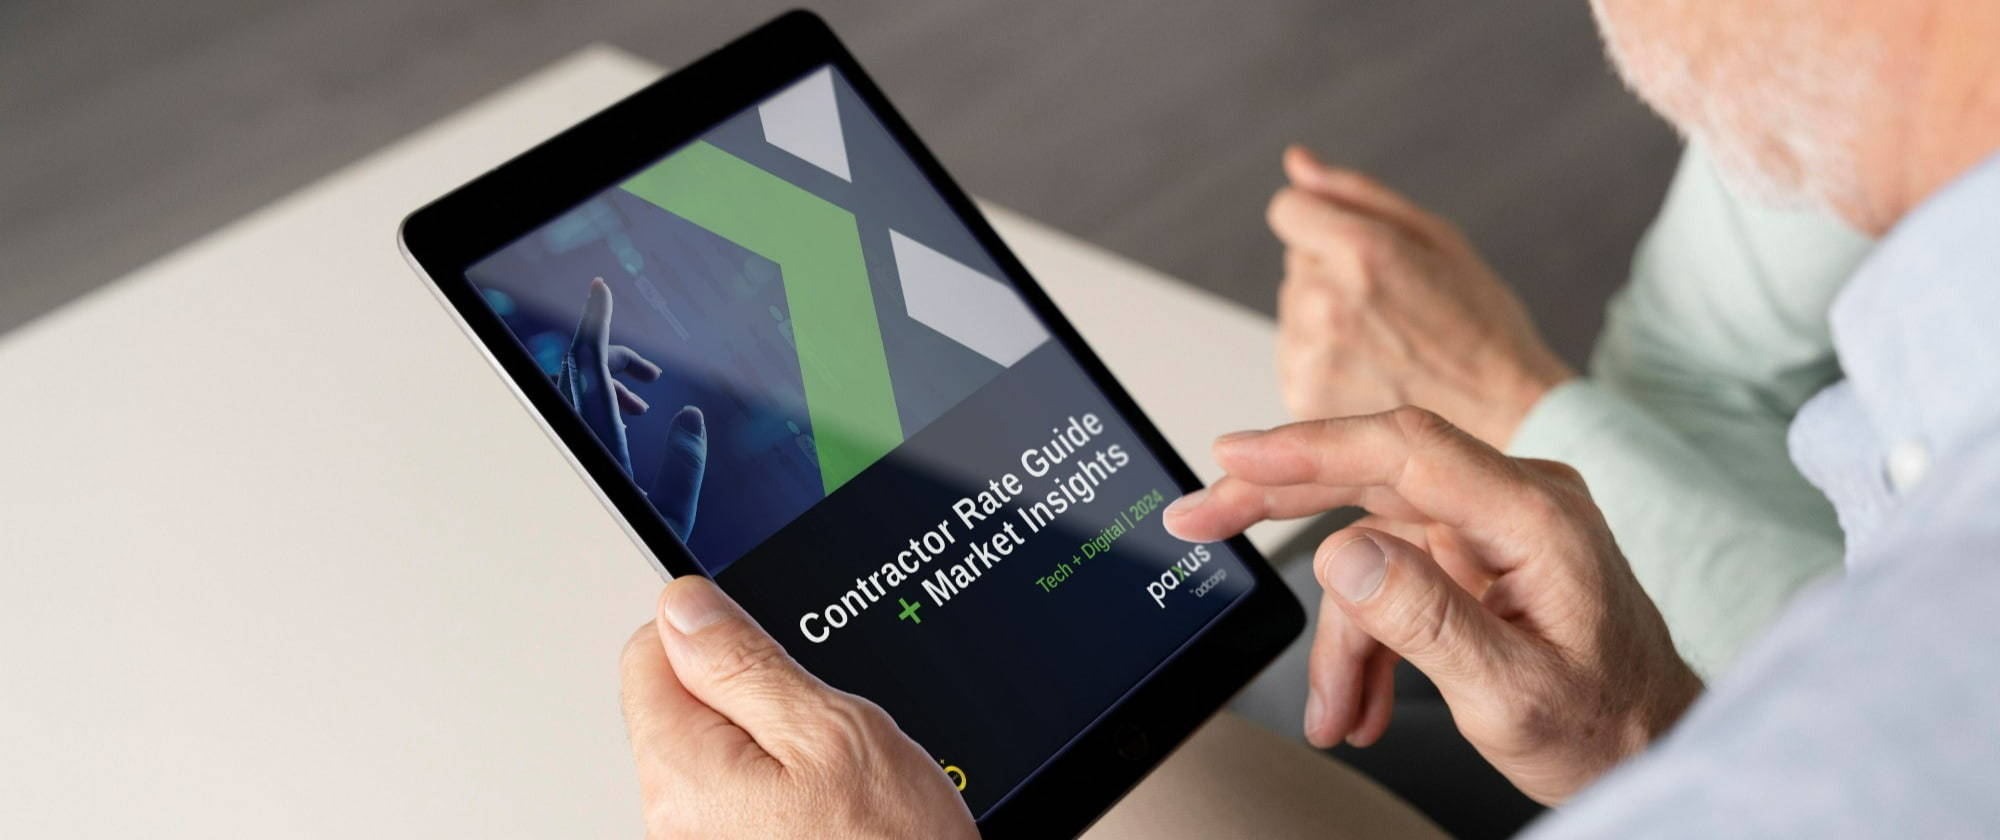 A person holding a tablet displaying a presentation slide with the title "contractor rate guide + marketing insights."